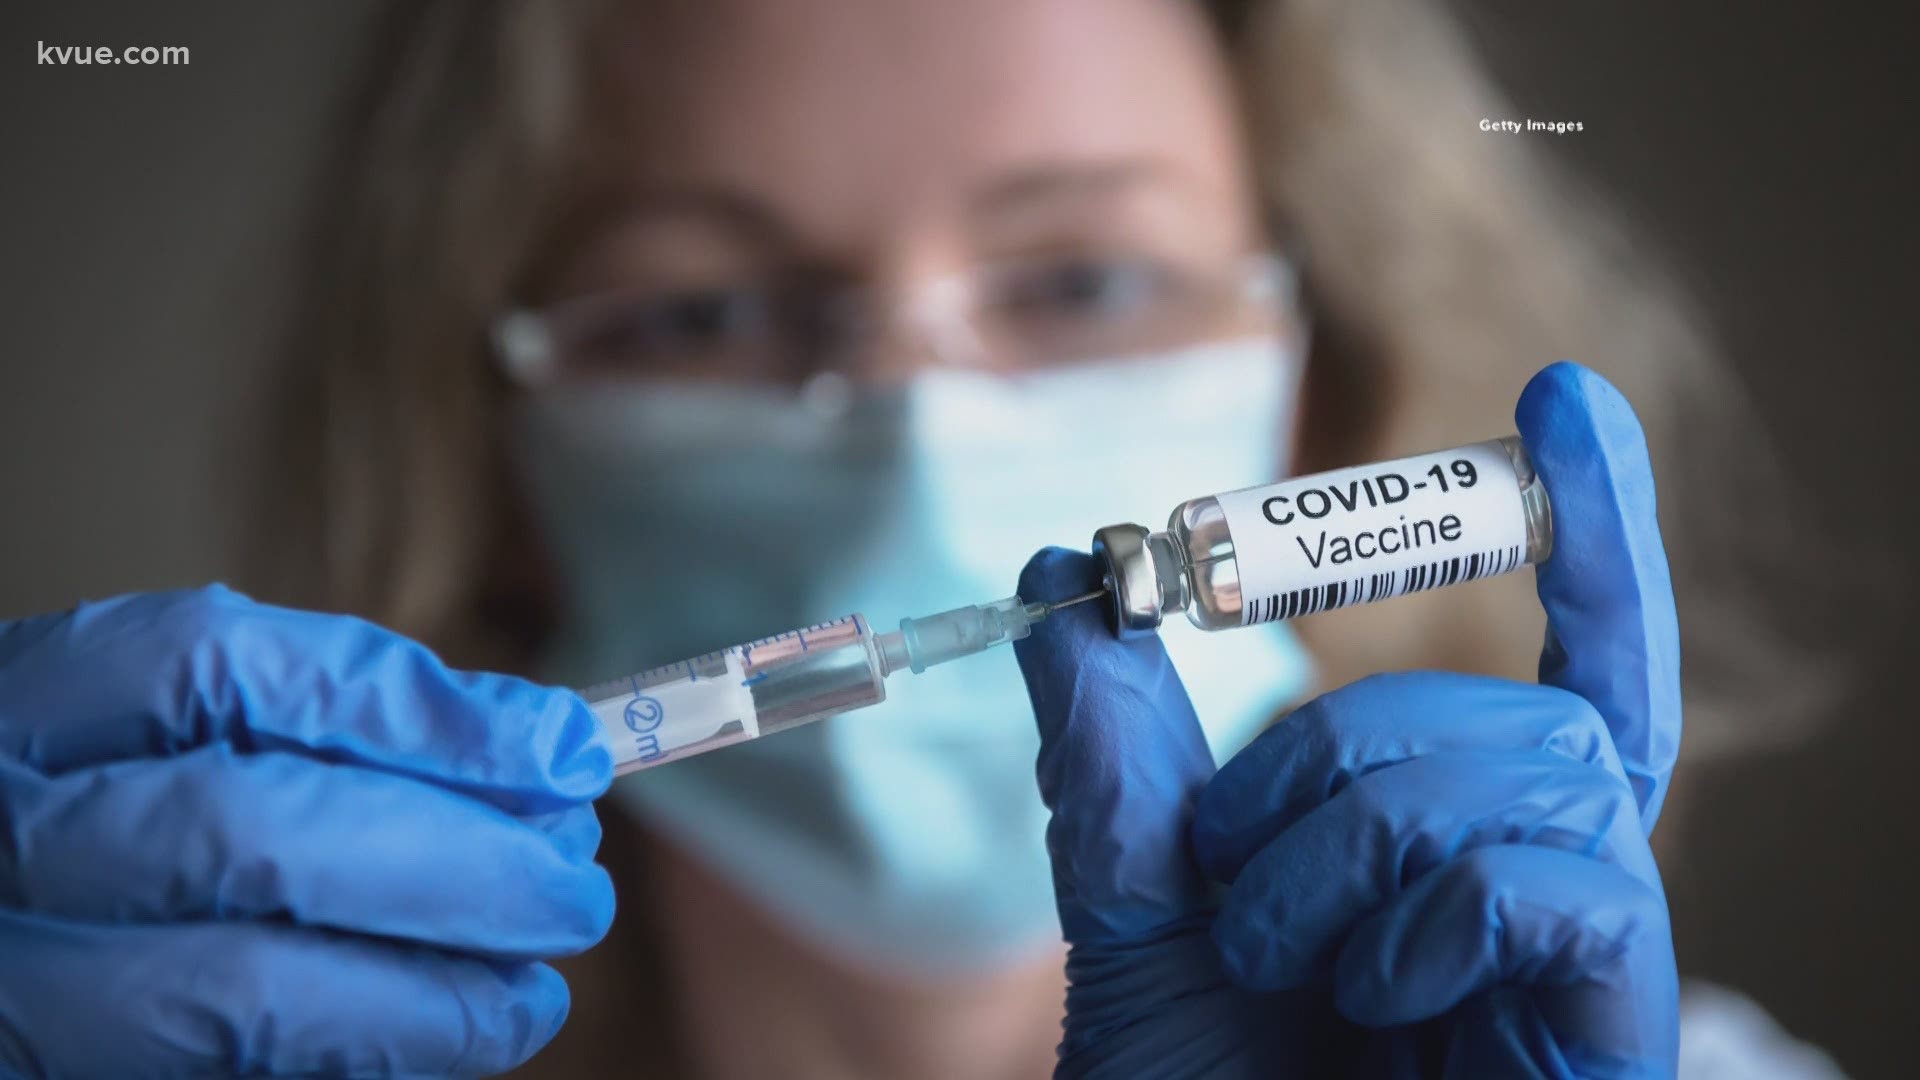 Although Pfizer's vaccine was authorized for emergency use, more vaccines and data are required to safely slow the spread of COVID-19.